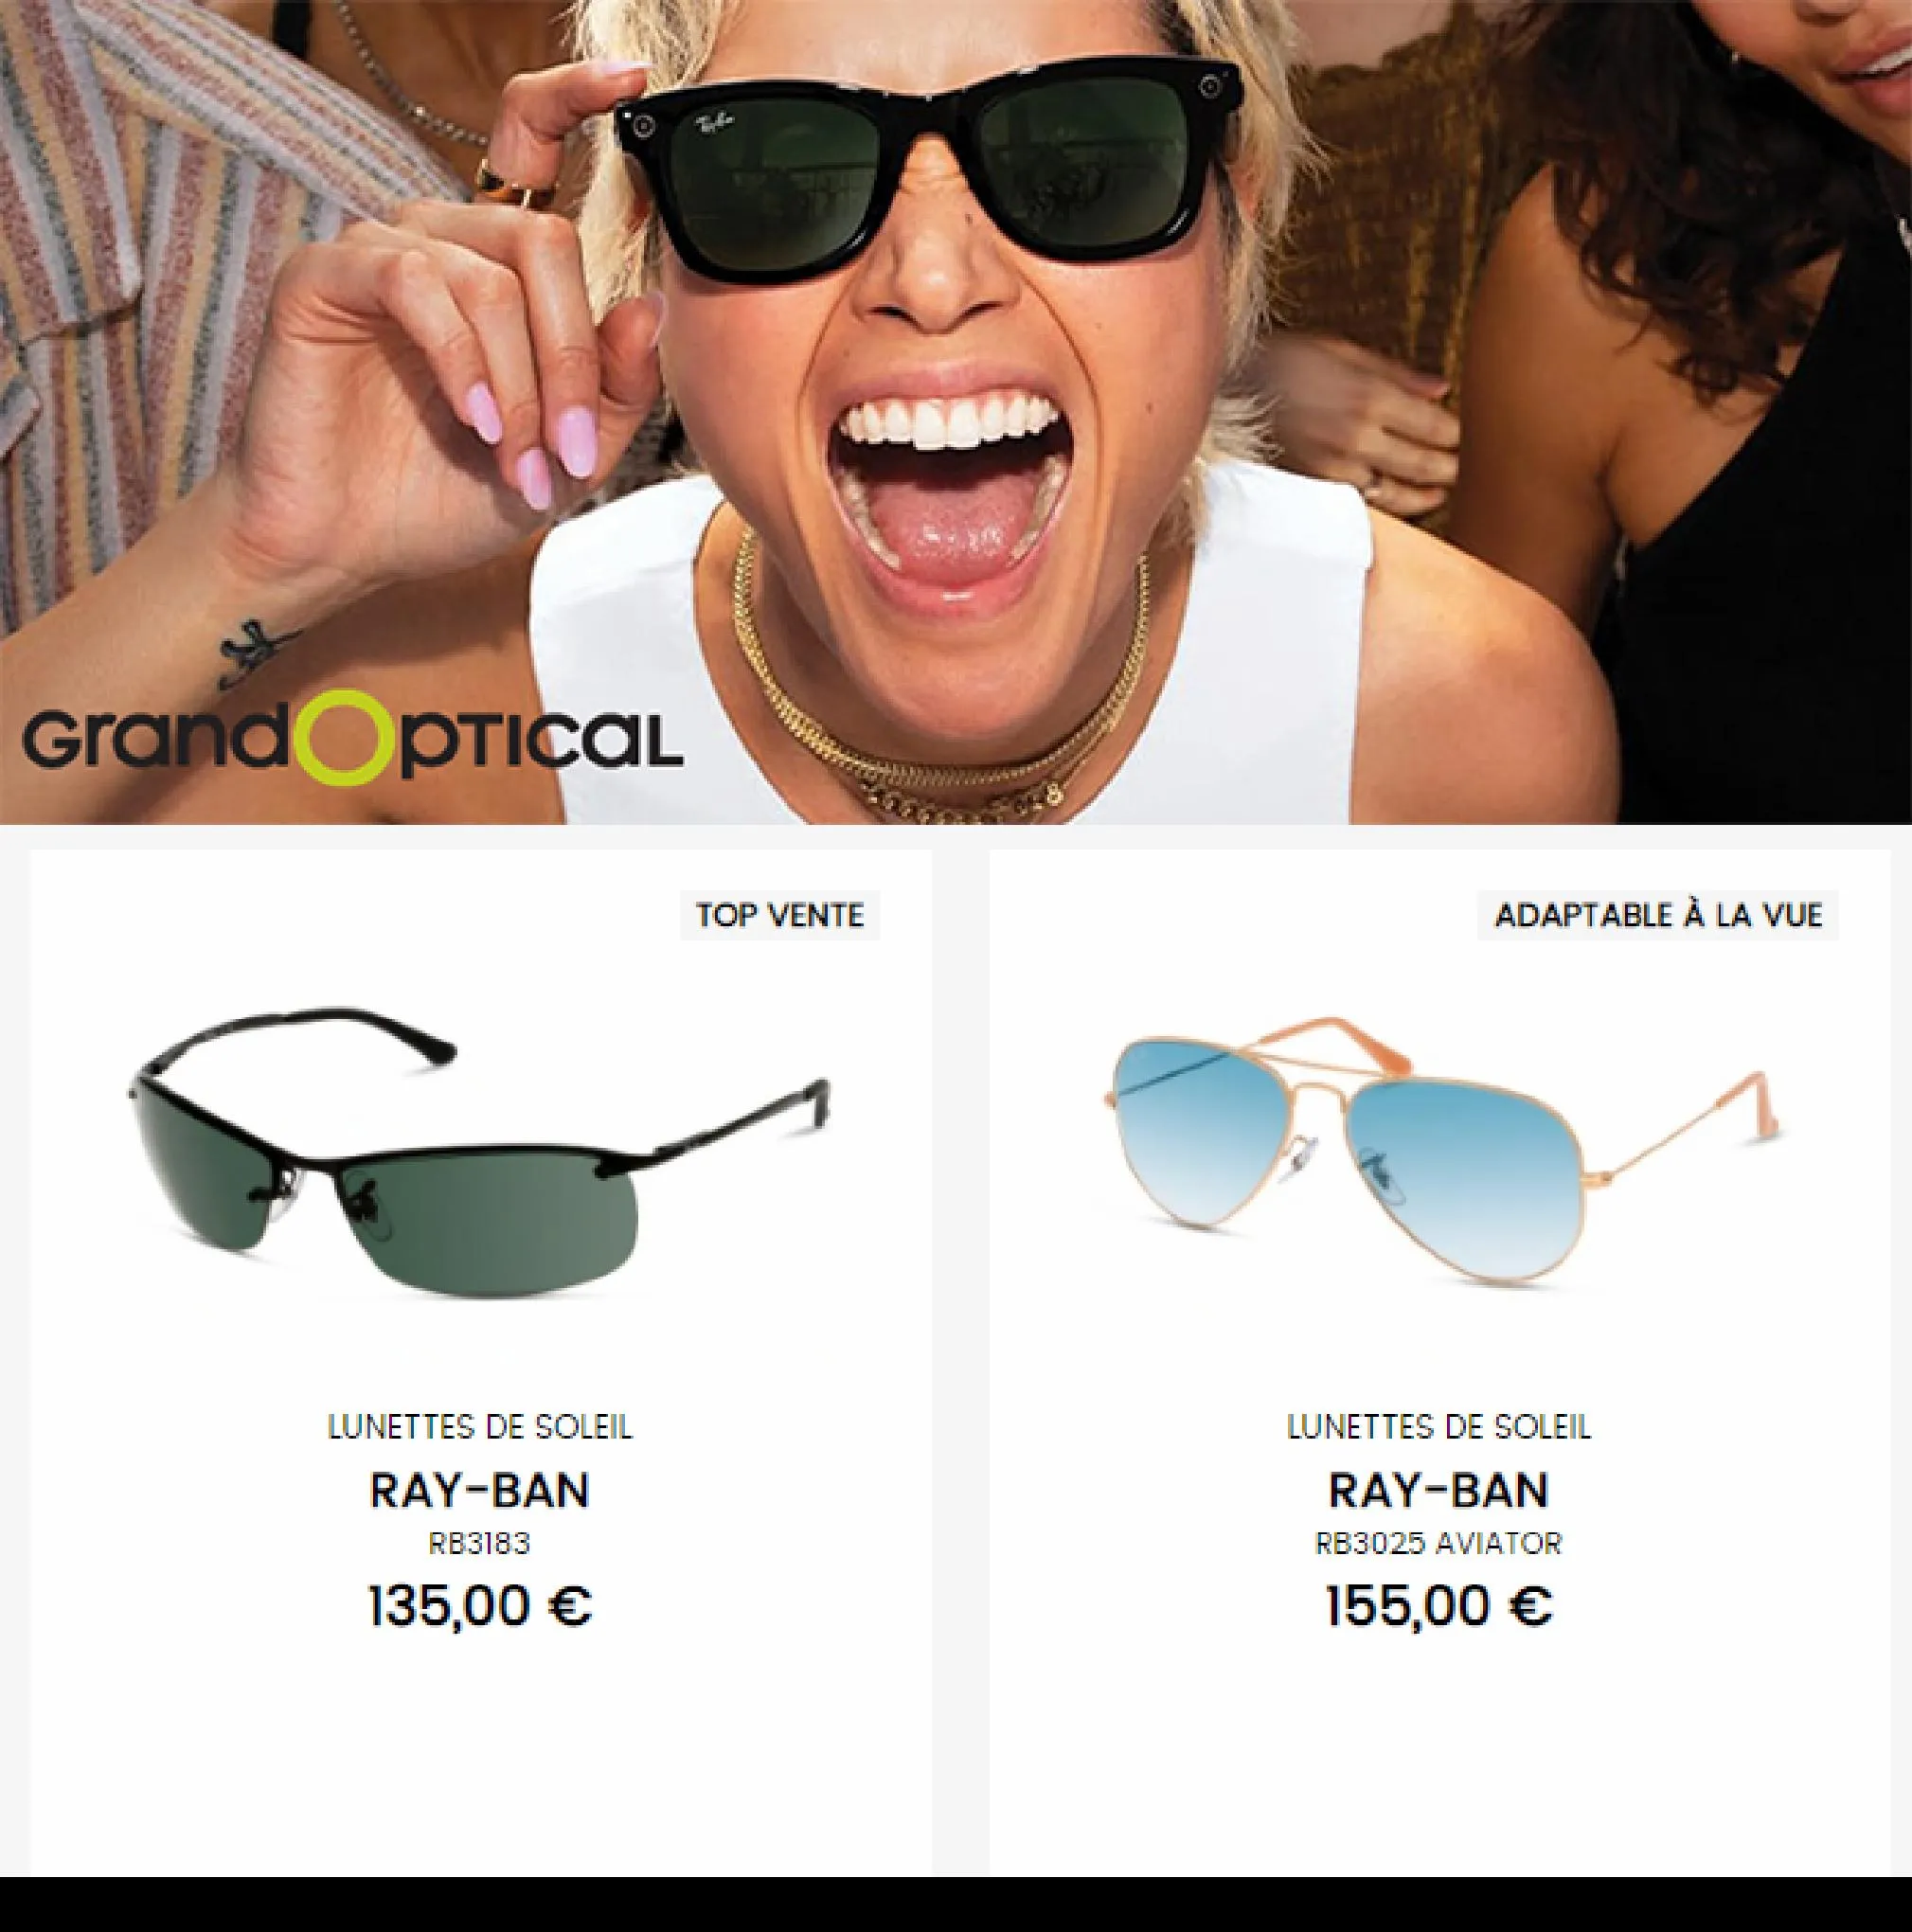 Catalogue Soldes Grand Optical, page 00004